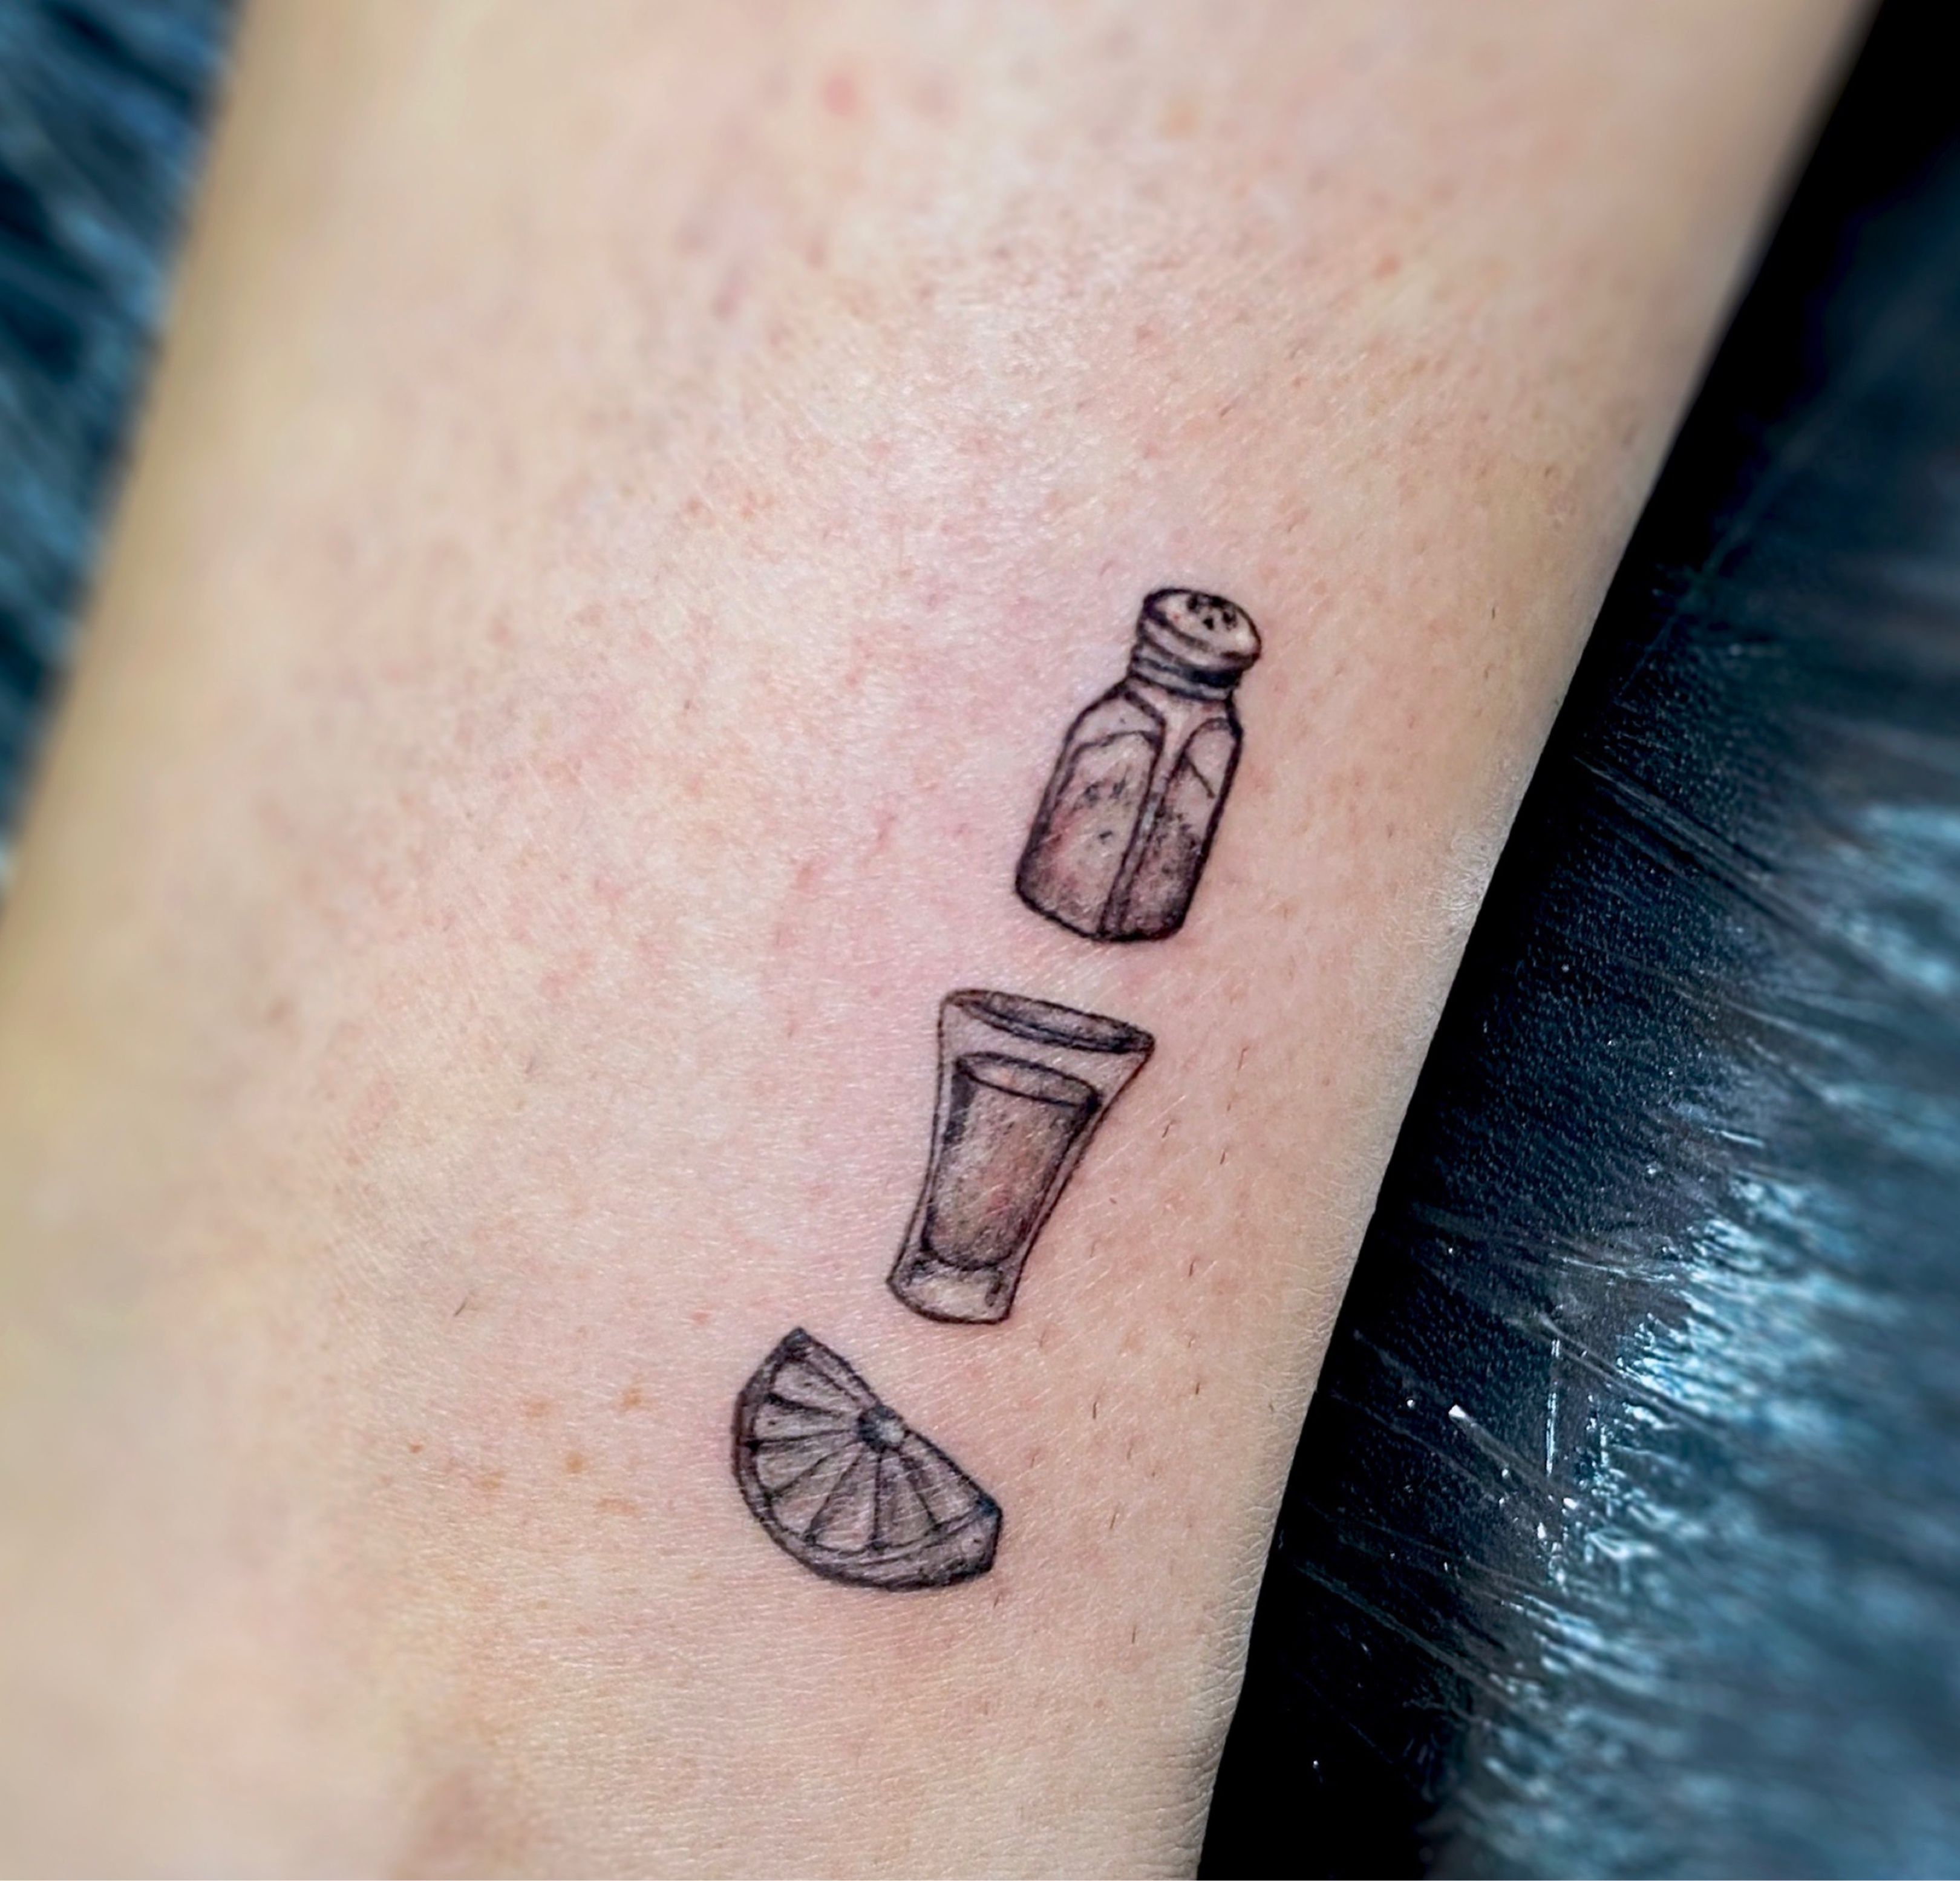 Tequila bottle tattoo by  Serious Ink Tattoo Inc  Facebook